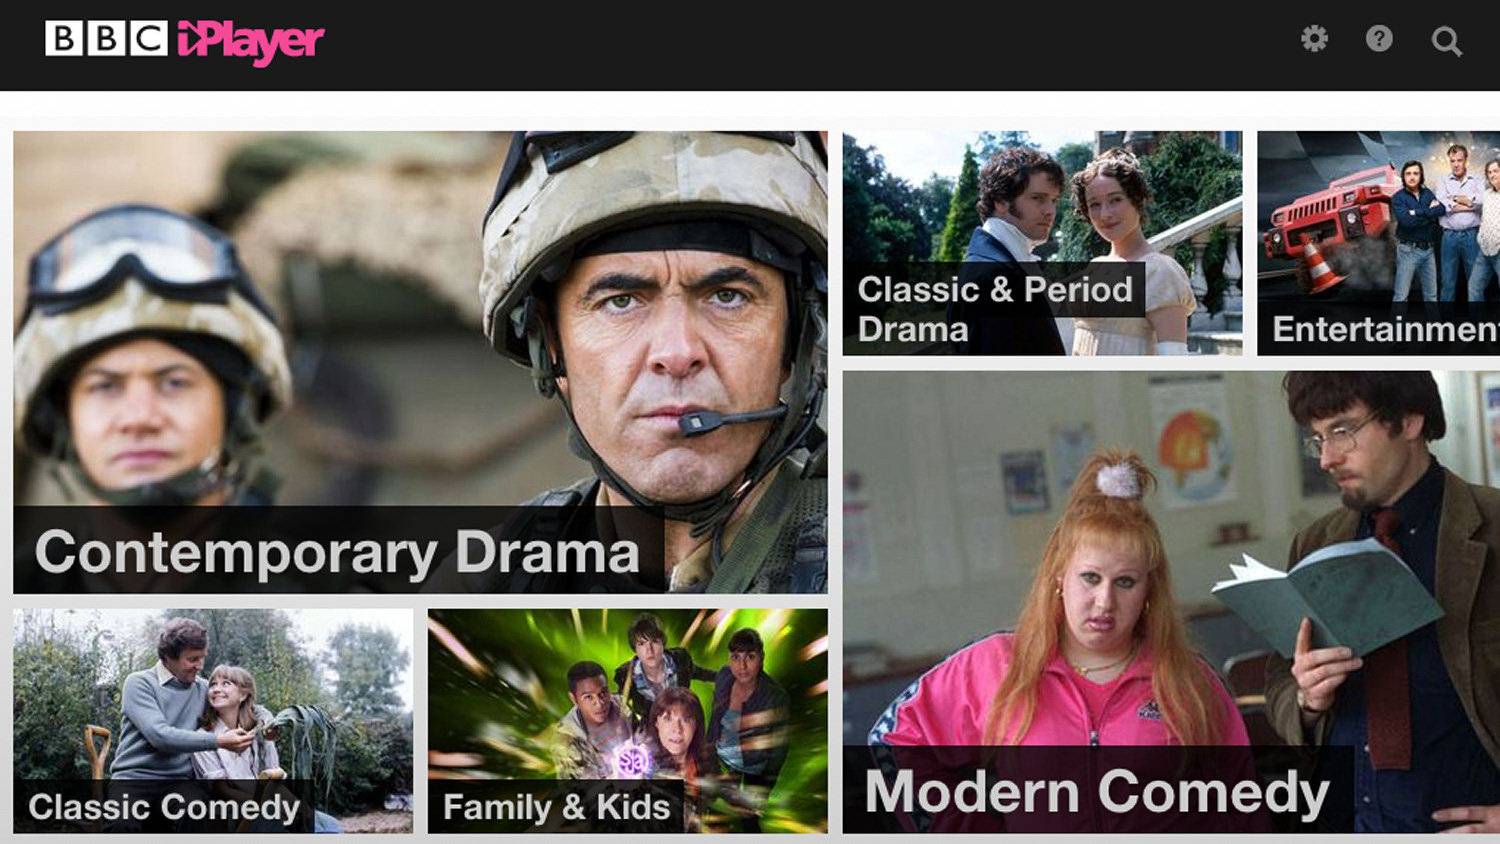 BBC iPlayer joins Canadas video-on-demand library